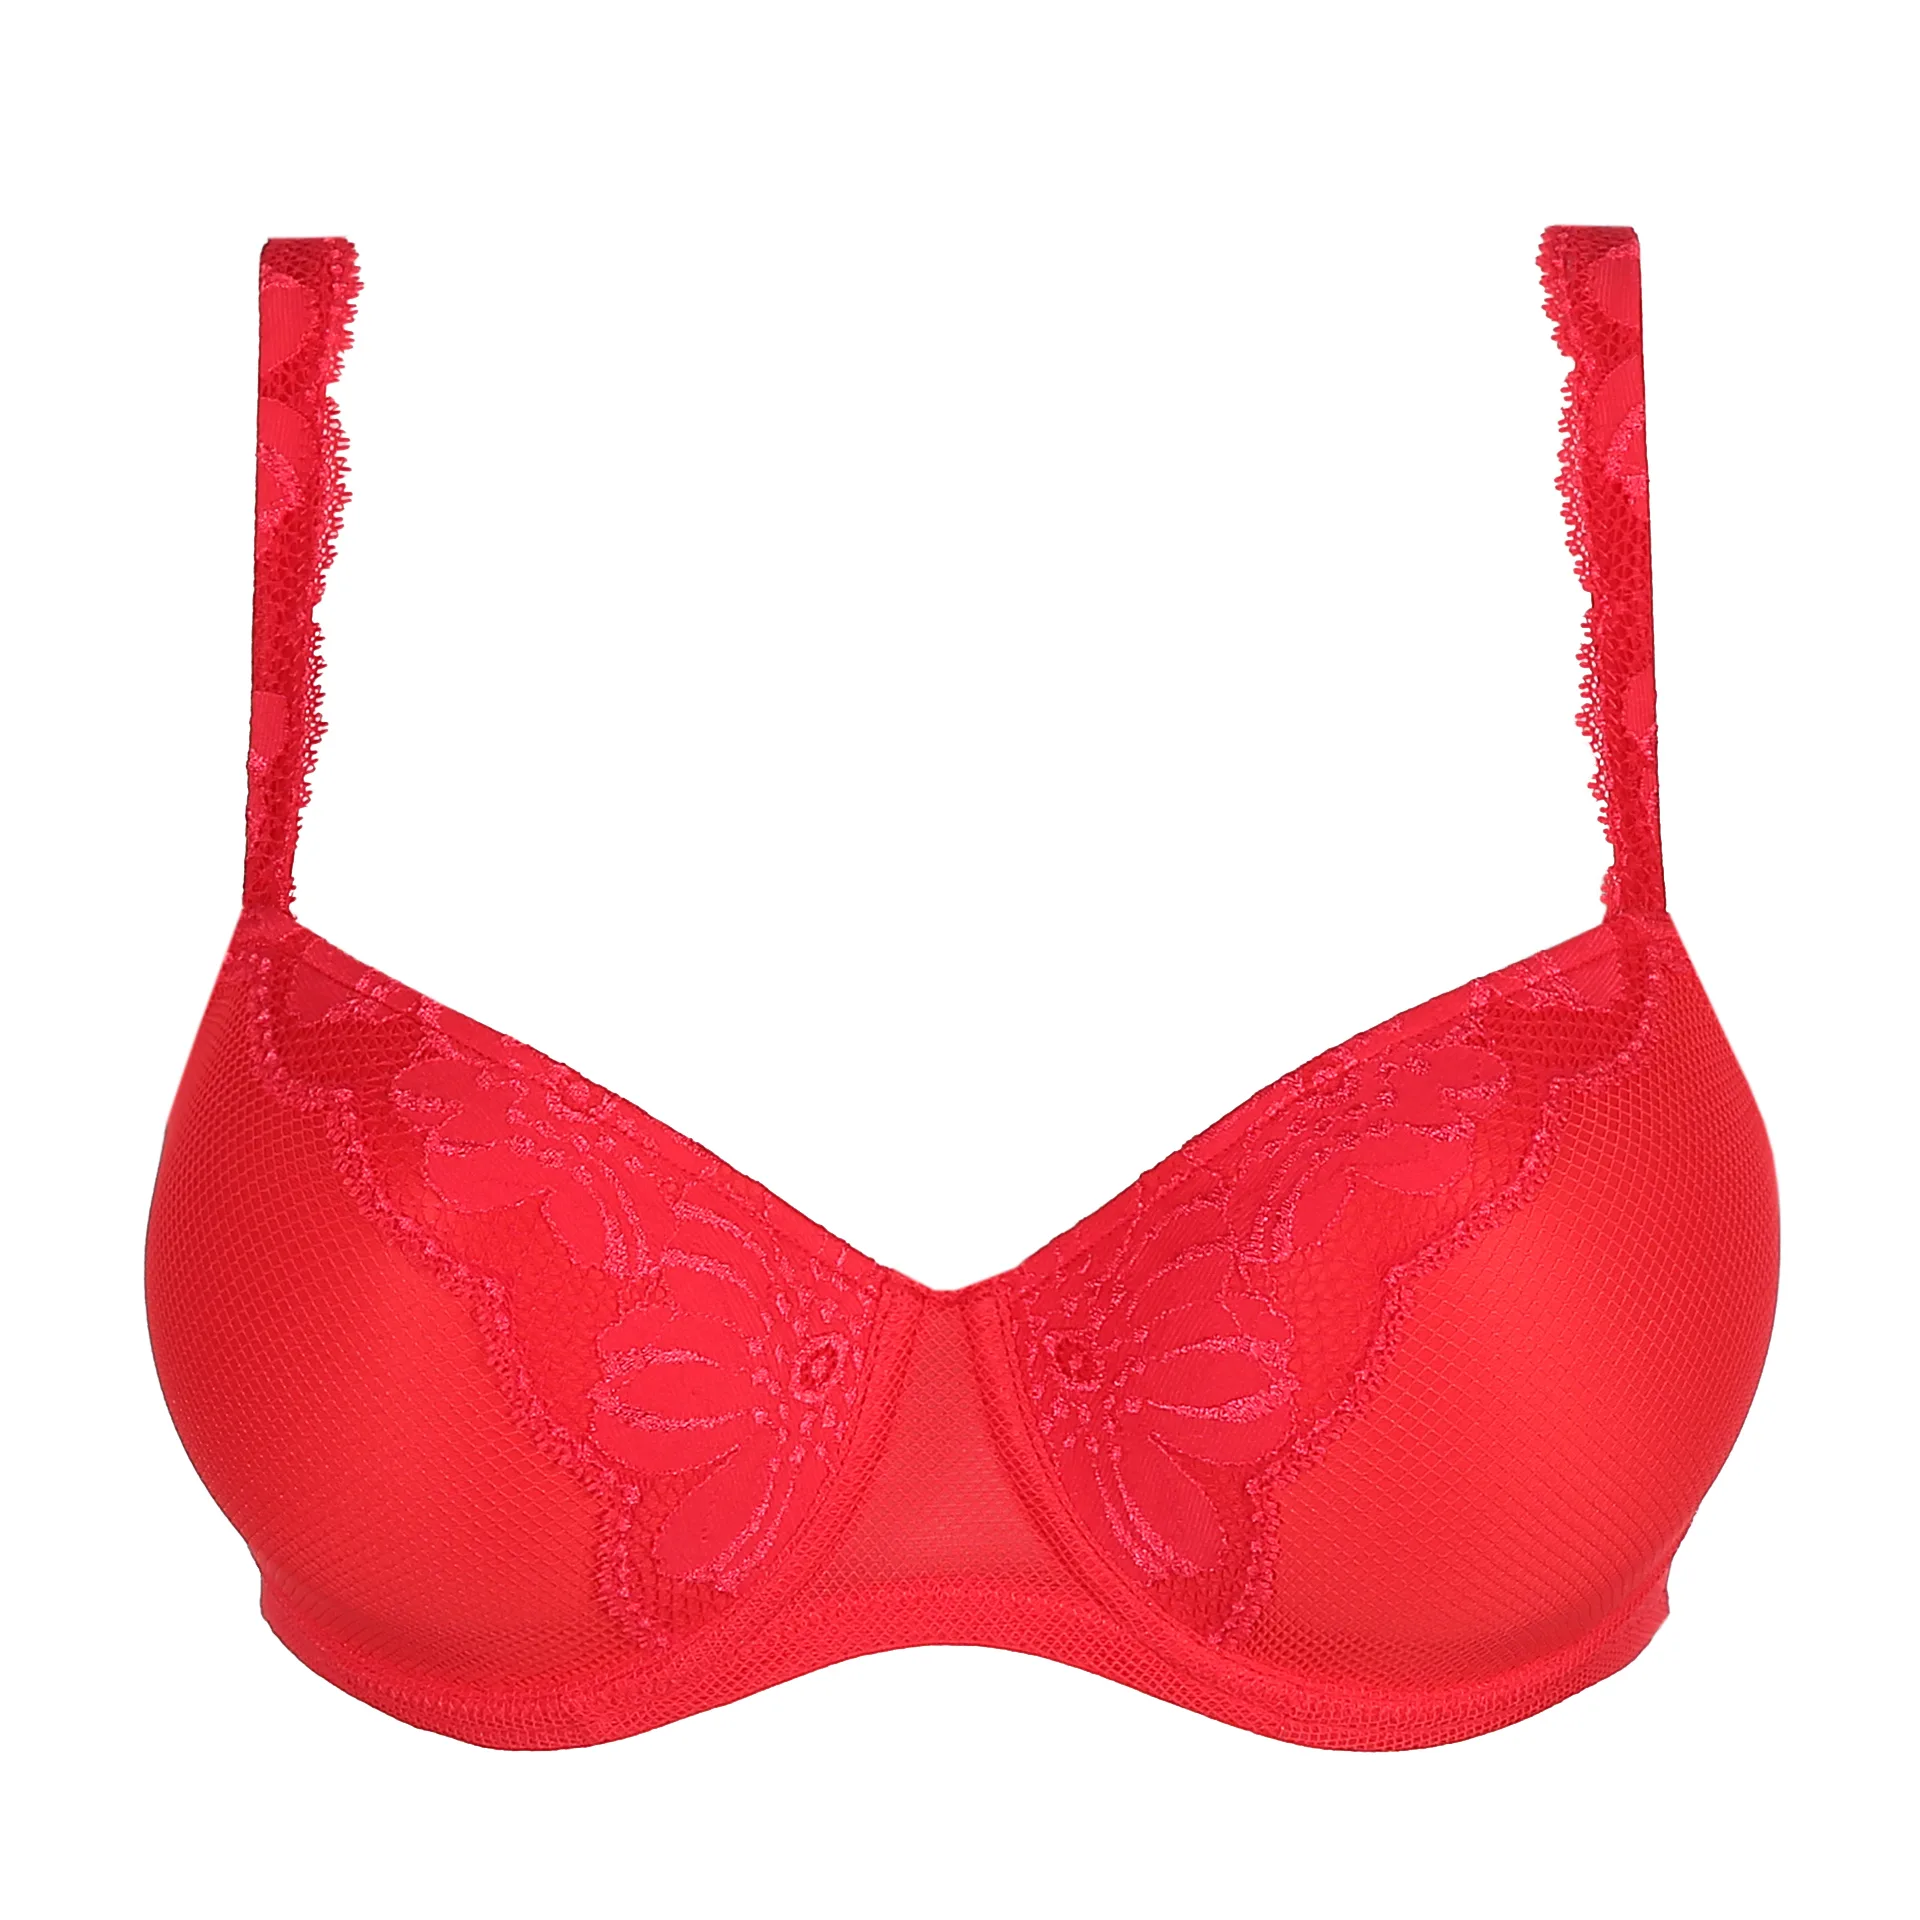 Padded lace balconette bra - Red - Ladies